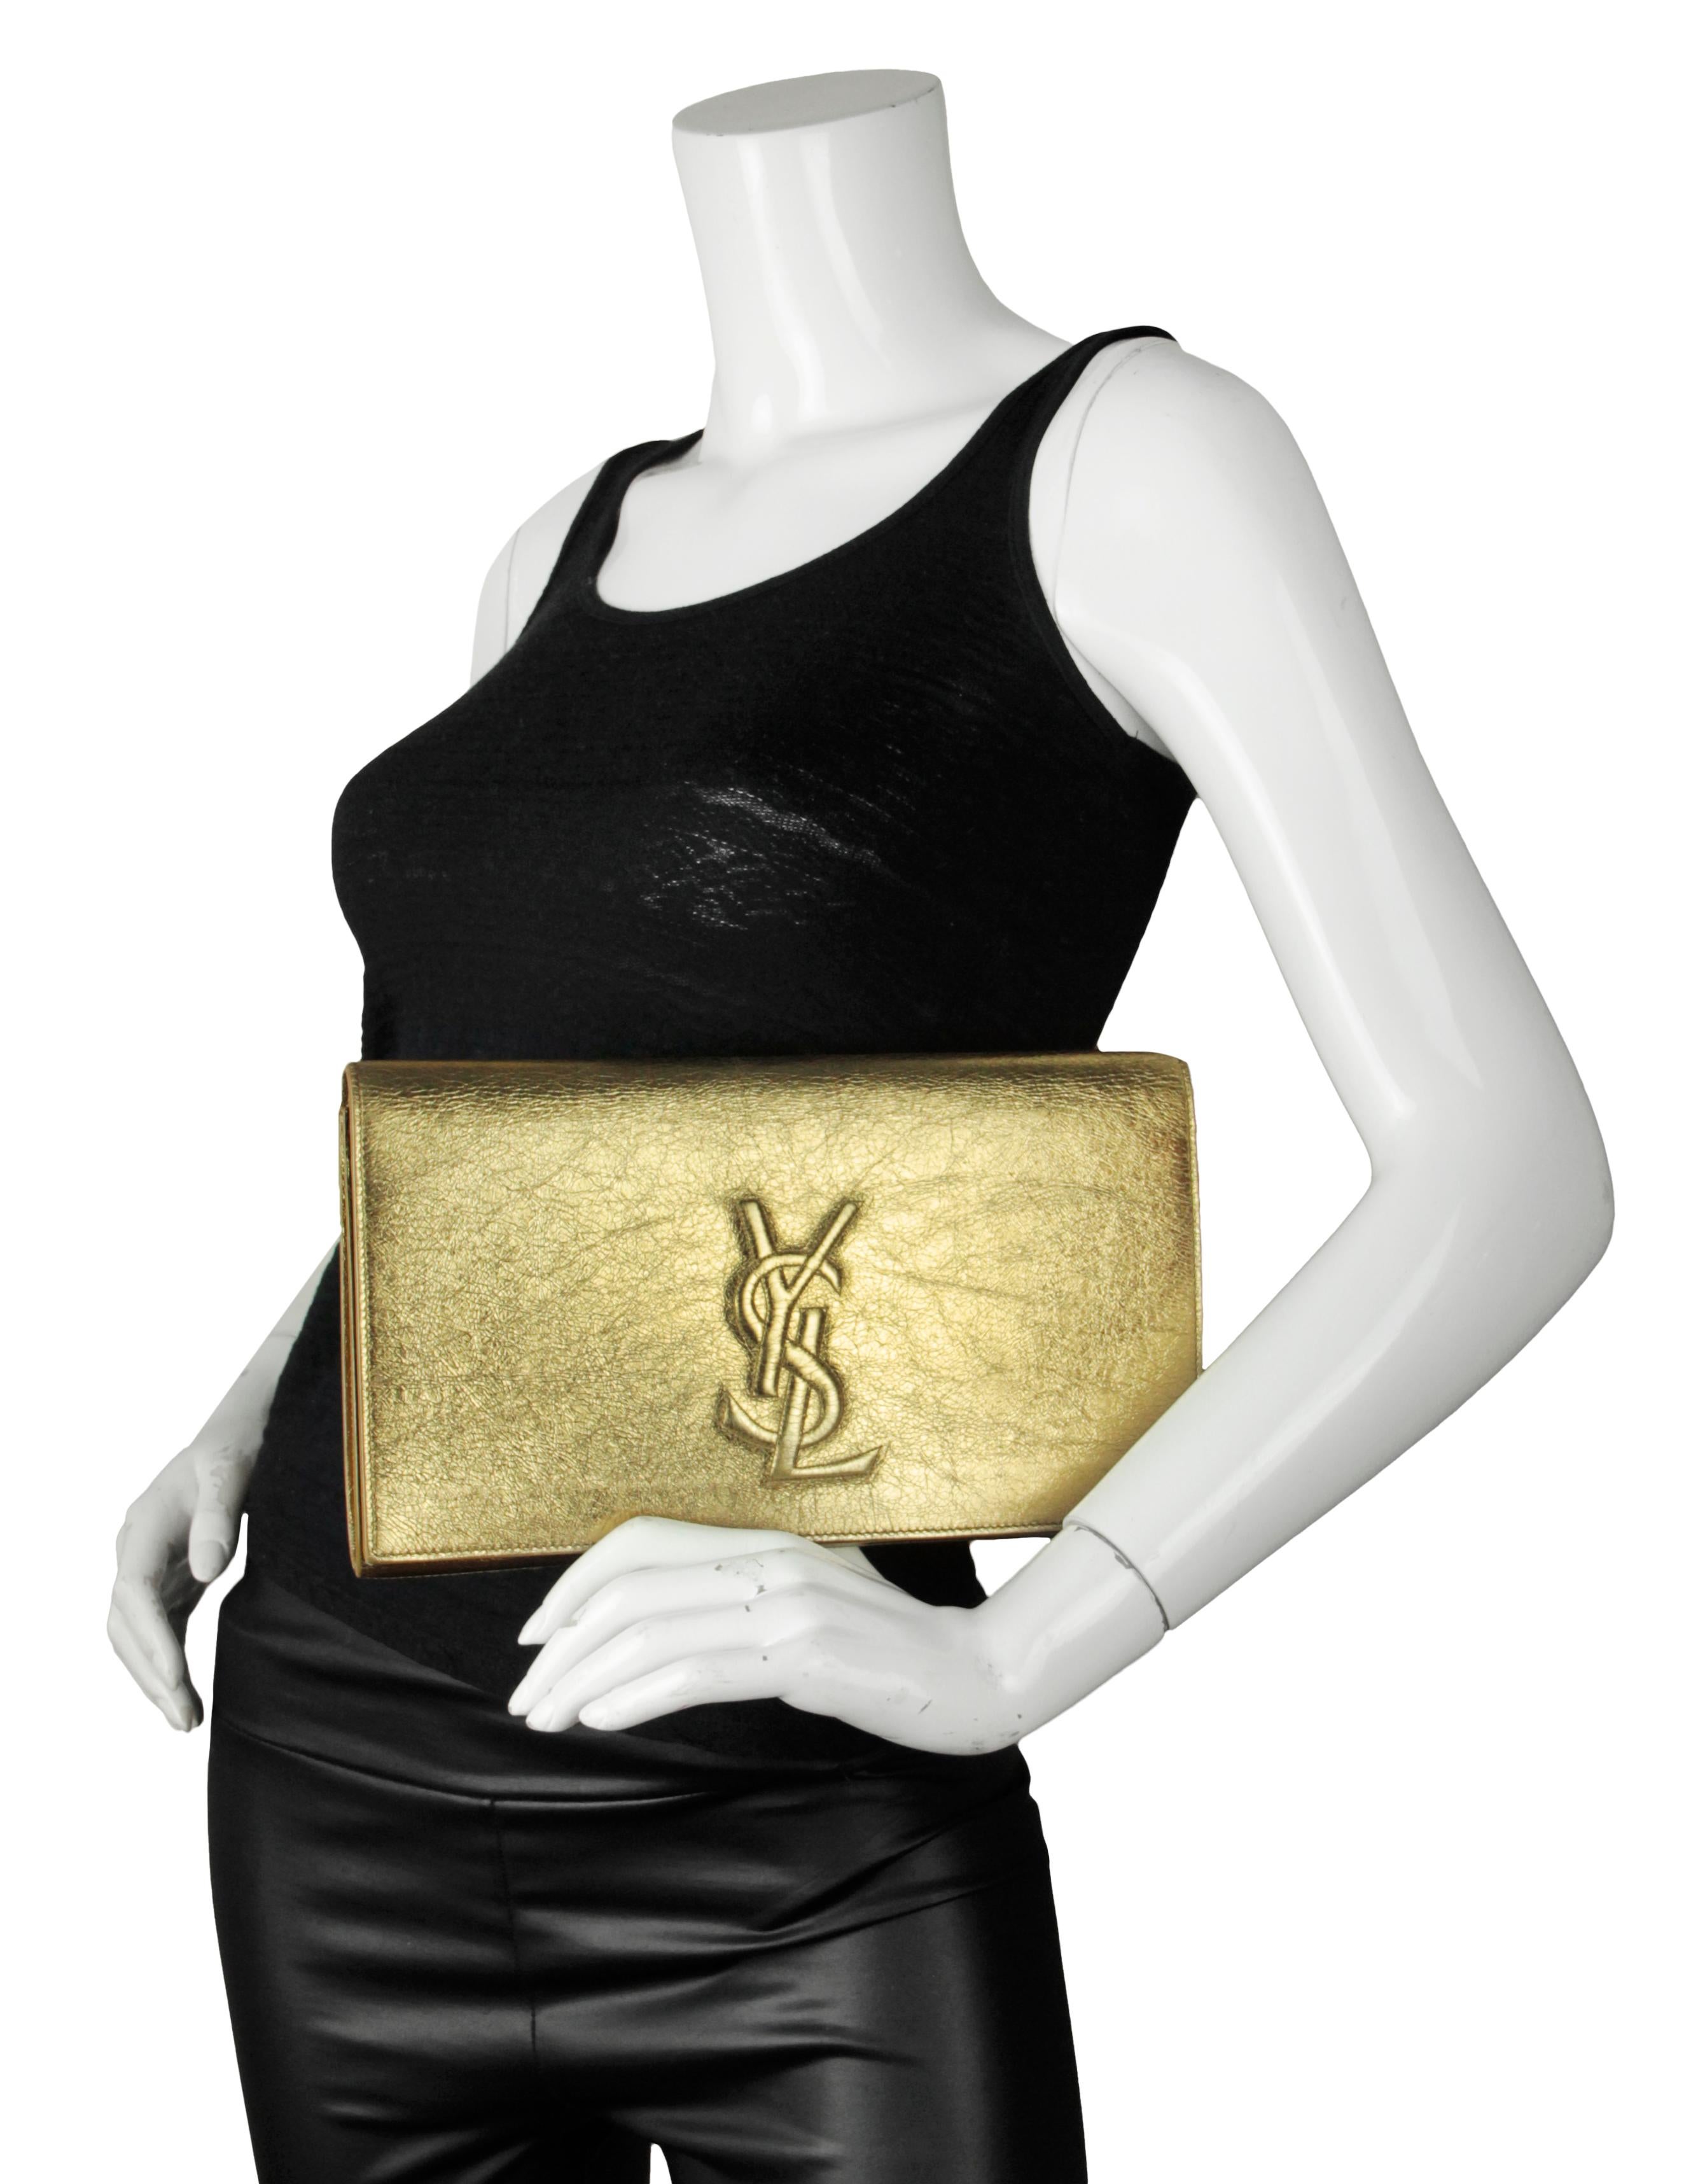 Yves Saint Laurent YSL Gold Large Belle De Jour Clutch Bag

Made In: Italy
Year of Production: 2015
Color: Dark gold
Materials: Glazed crinkled leather
Lining: Satin textile
Closure/Opening: Magnetic snap
Interior Pockets: Patch pocket at